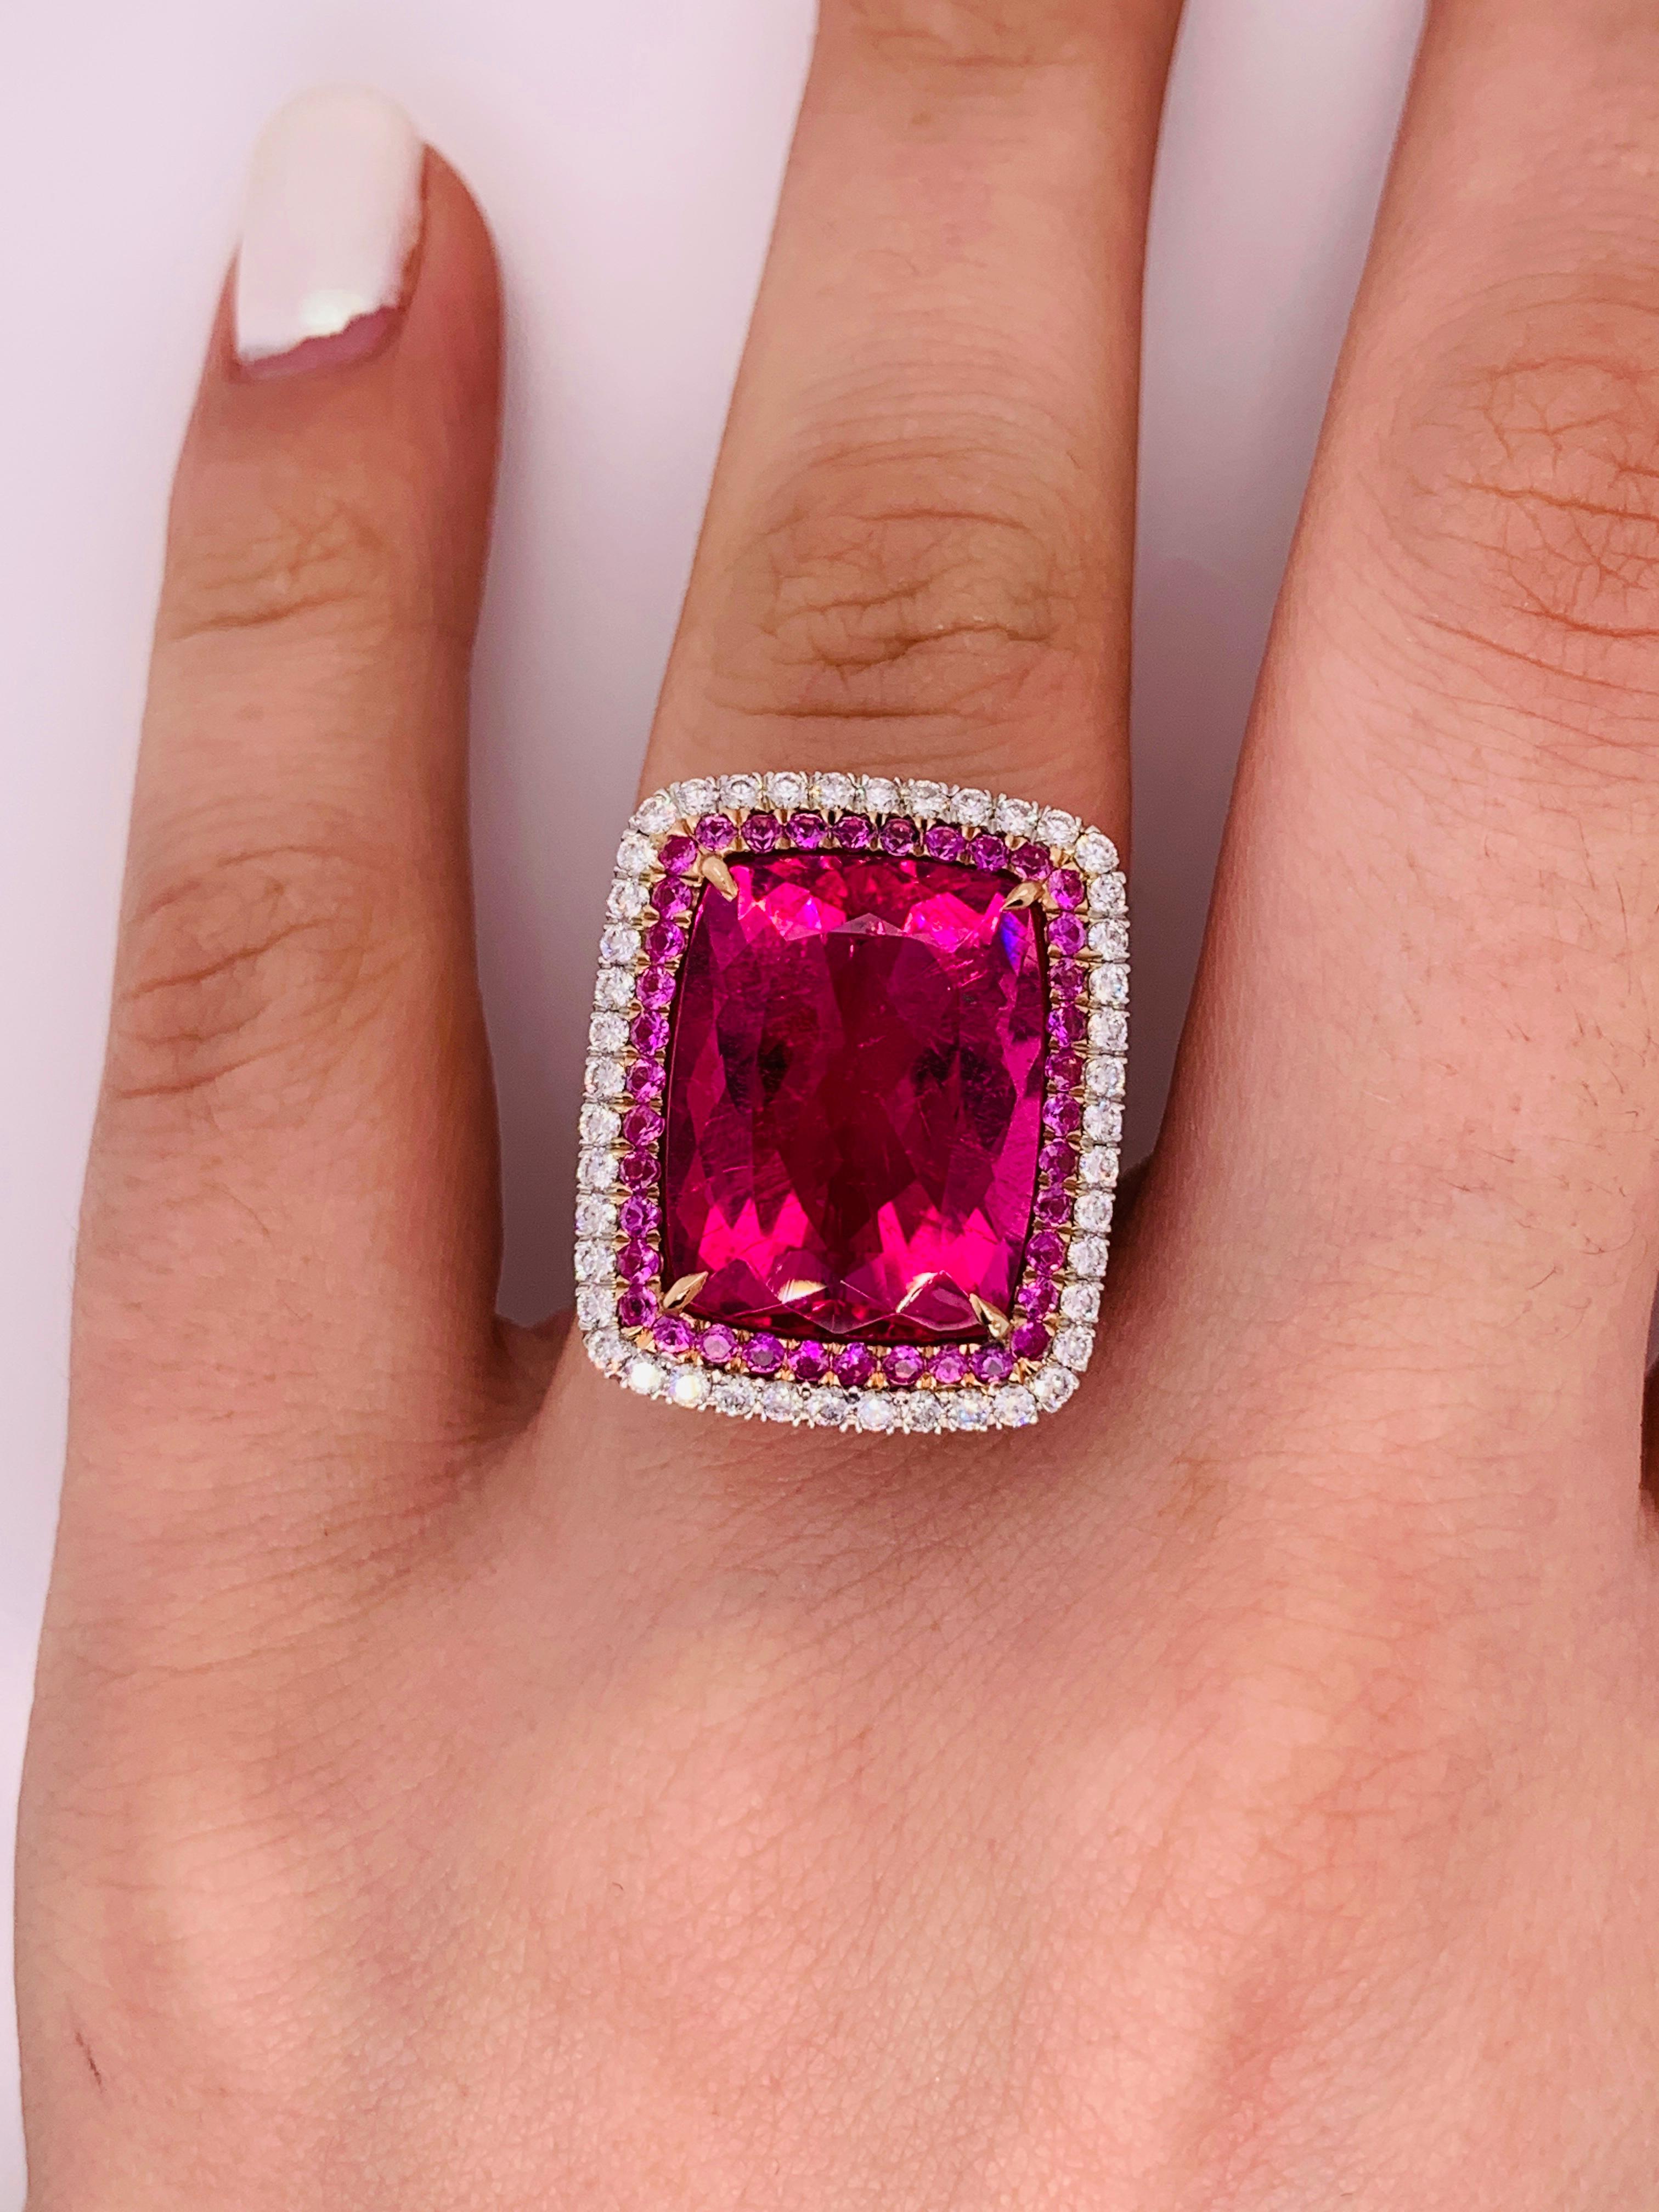 Stunning Pink Tourmaline and Diamond Ring in white gold
The center stone is 16.60 Carats Pink Tourmaline, surrounded by 0.80 carats of small pink tourmalines  and 1.50 carats of white brilliant cut diamonds. 
